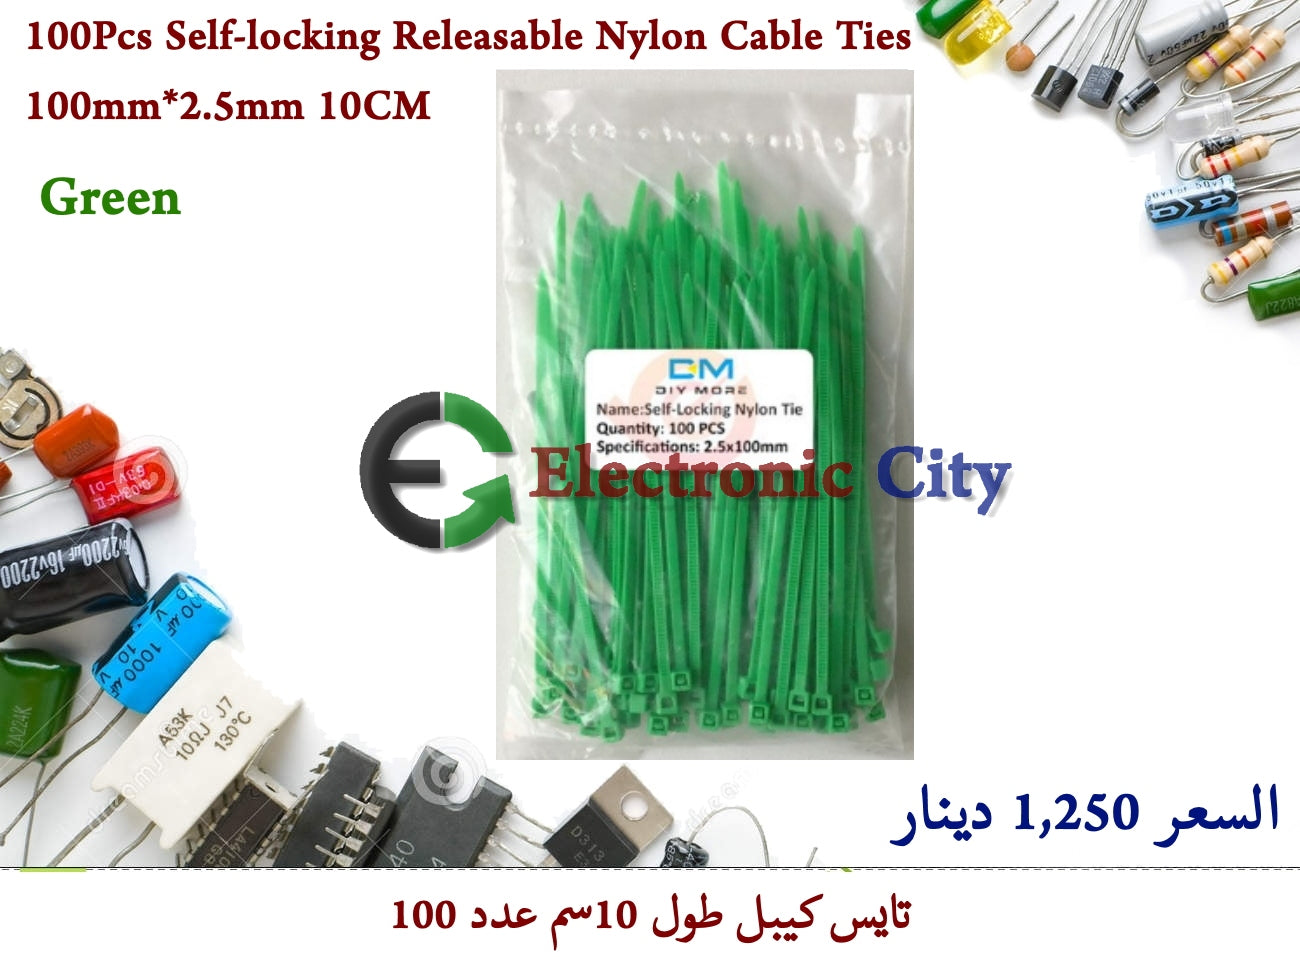 100Pcs Self-locking Releasable Nylon Cable Ties 100mmX2.5mm 10CM Blue.5mm 10CM Green